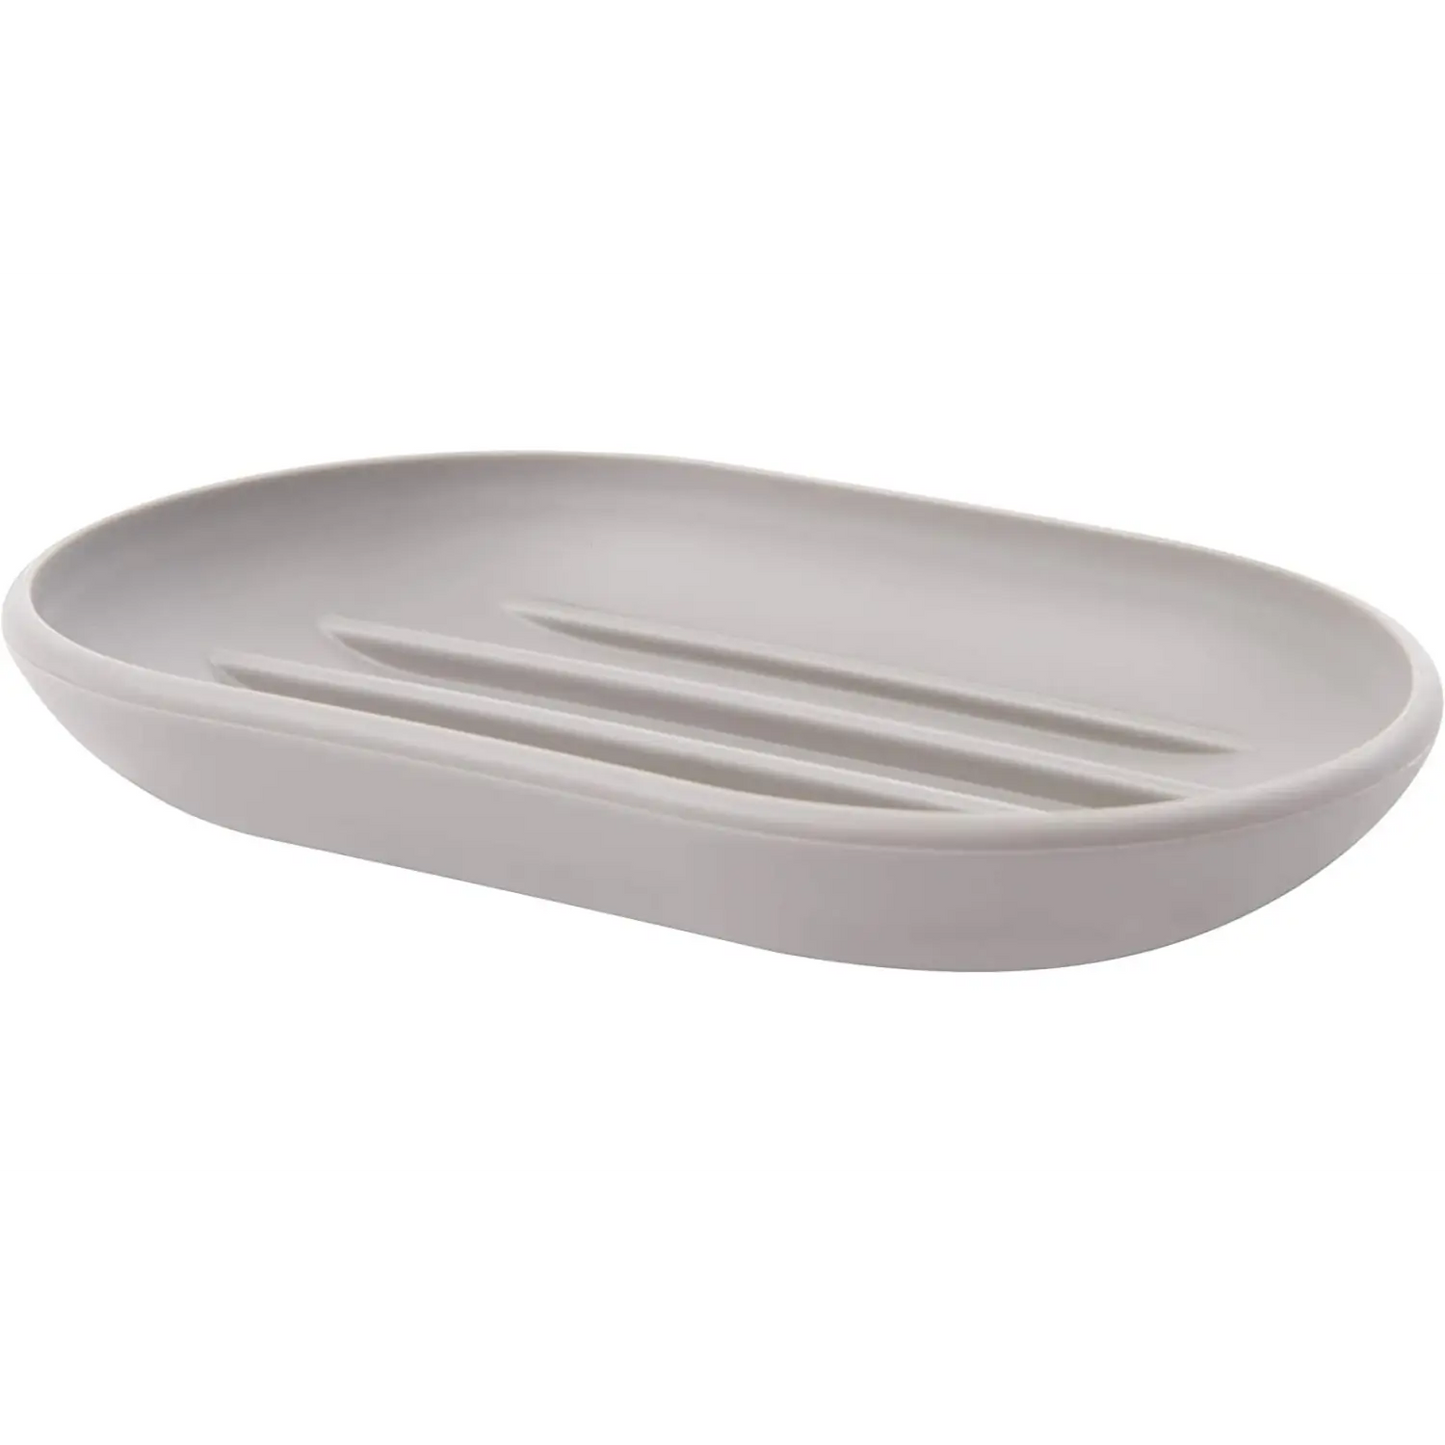 Umbra Touch Soap Dish (Matte Grey) 023272-918 - Misc